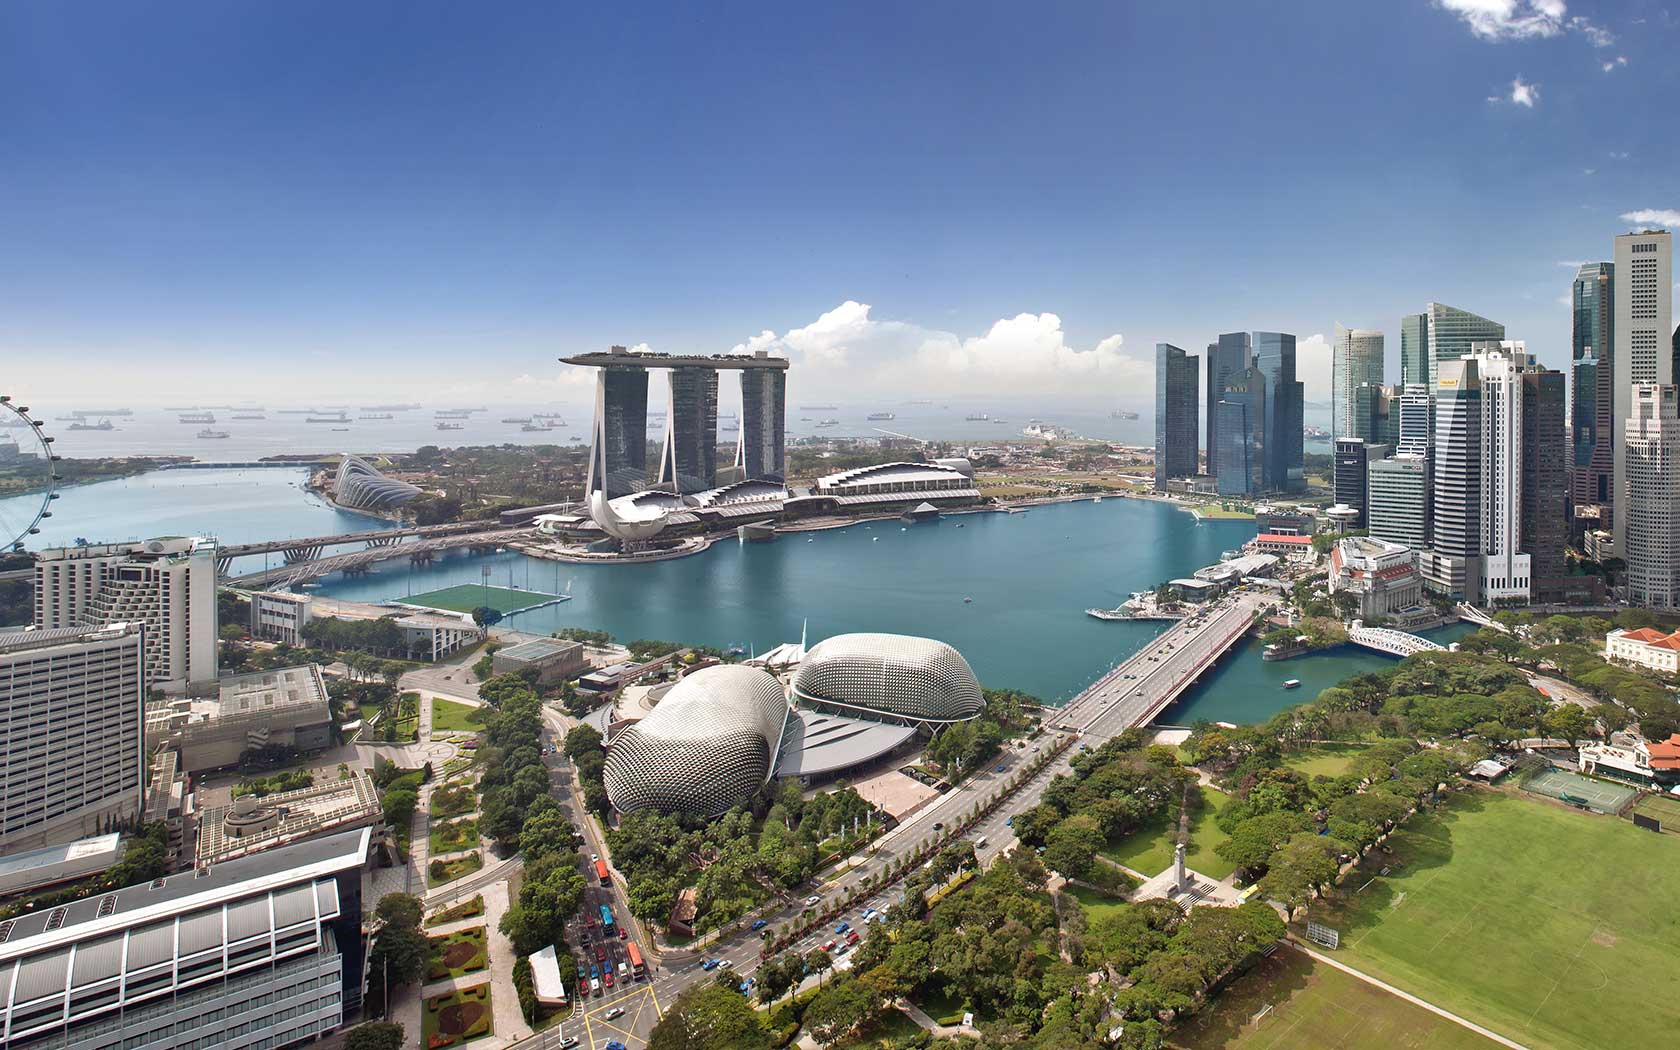 Image of aerial view of Esplanade and the Marina Bay.